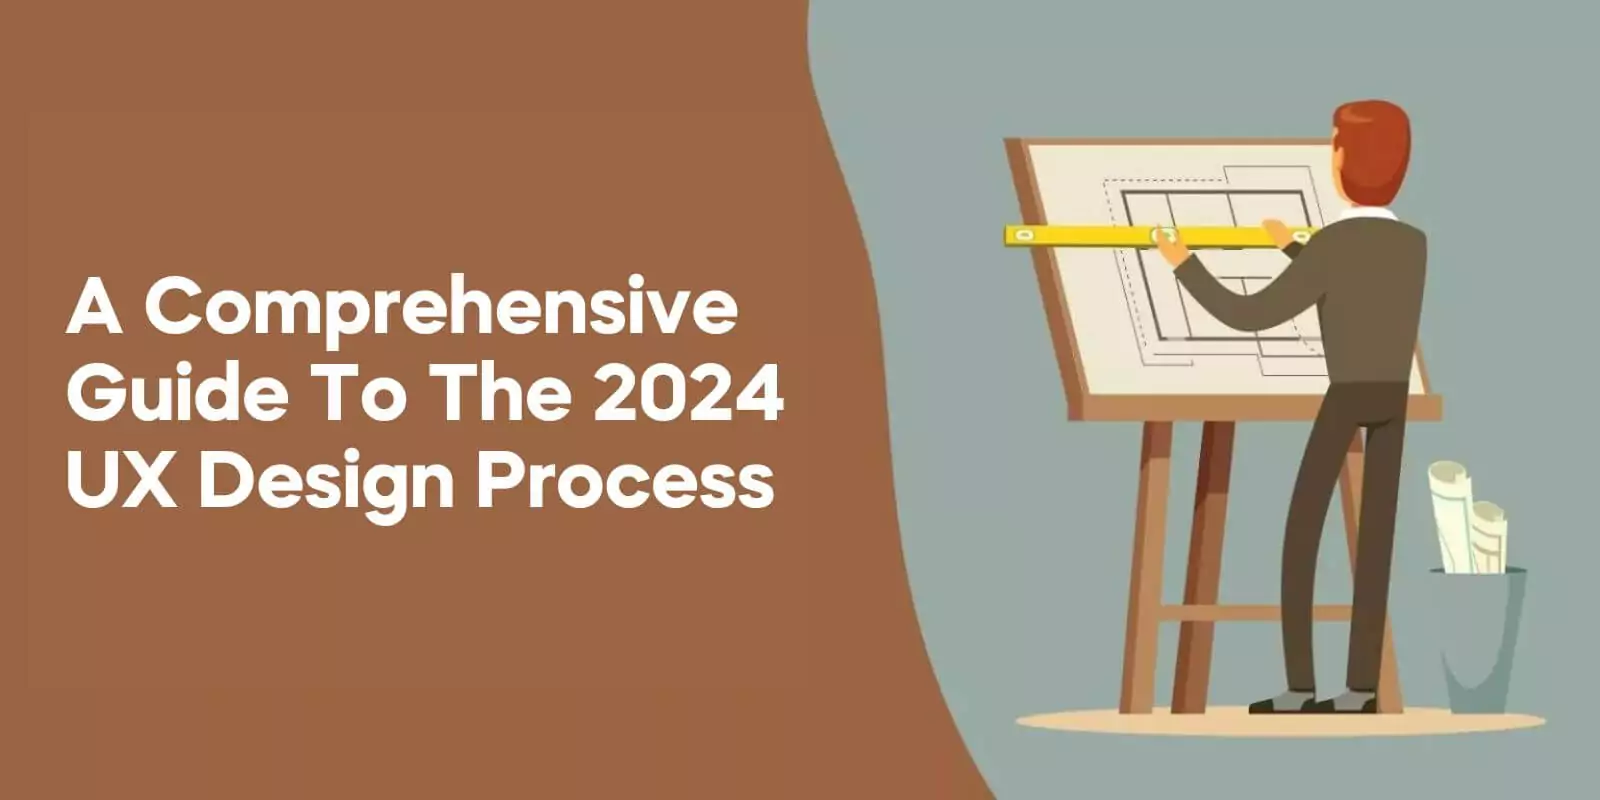 A Comprehensive Guide to the 2024 UX Design Process